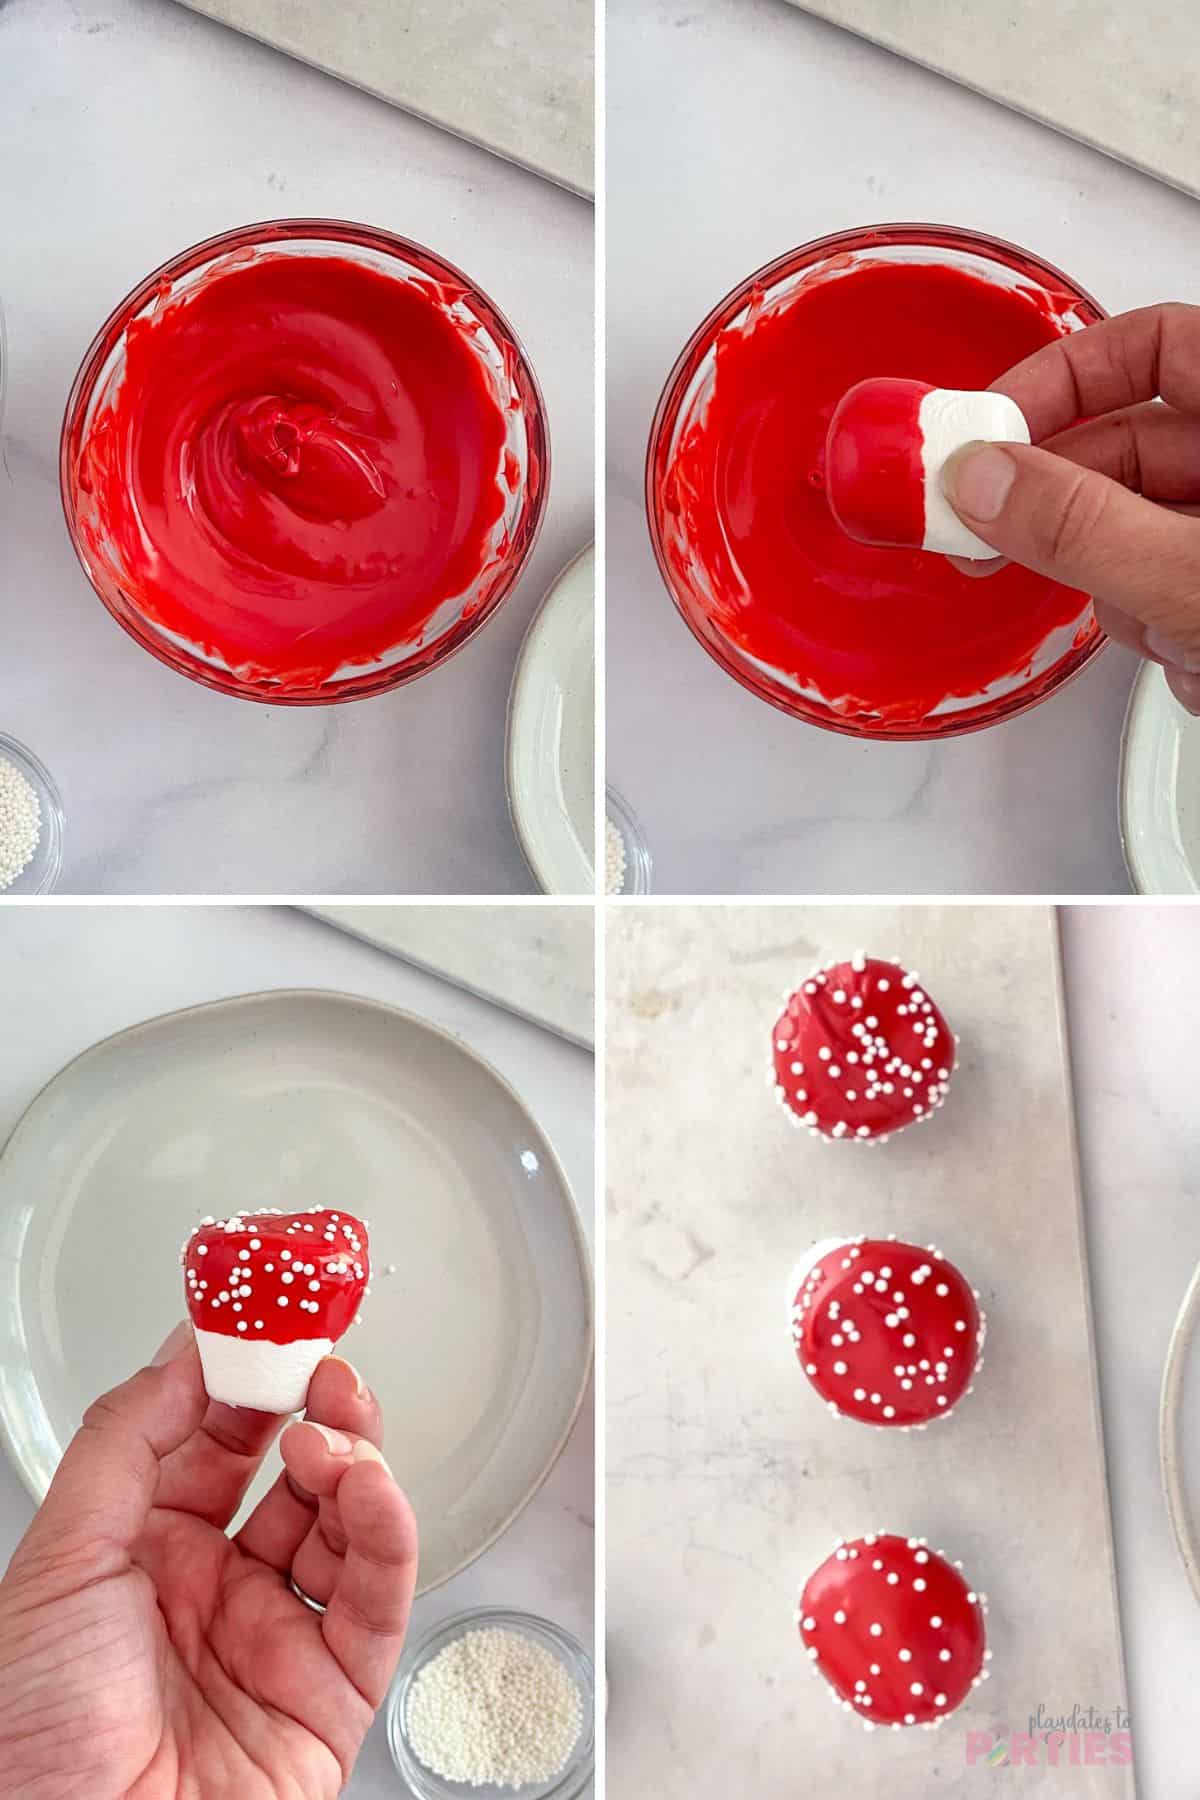 How to make marshmallow mushrooms with candy melts.